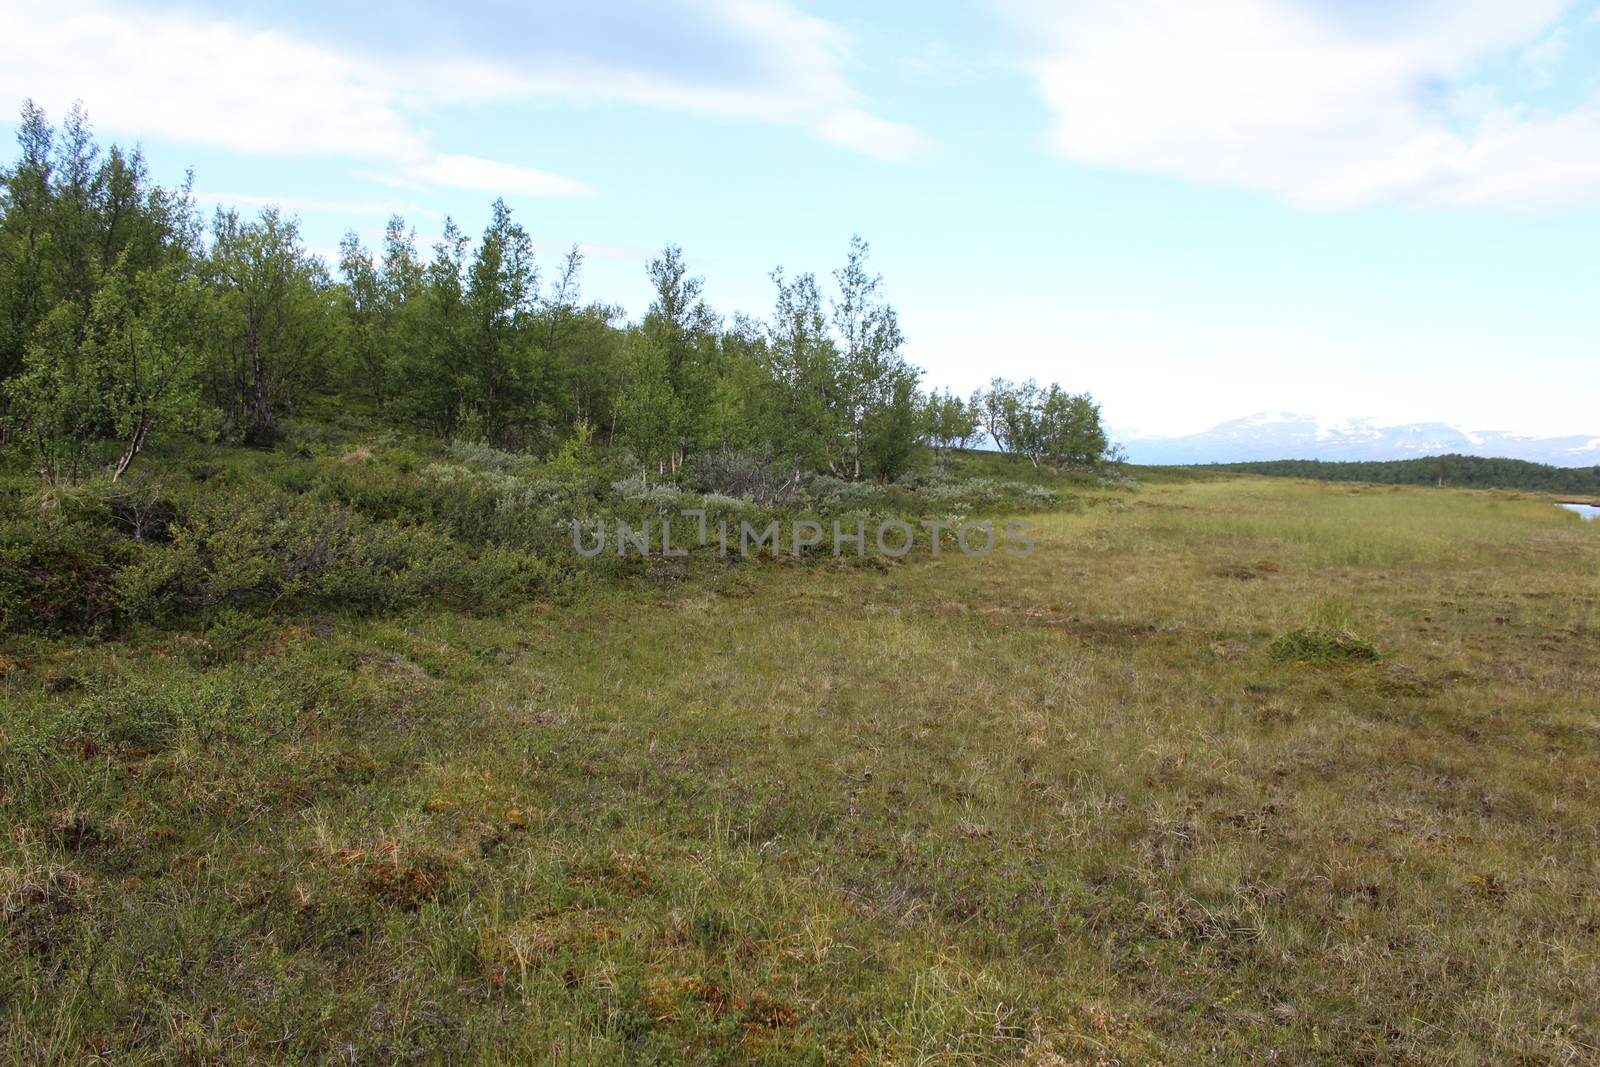 Overview of mountain wetland in arctic tundra in abisko national park, northern Sweden